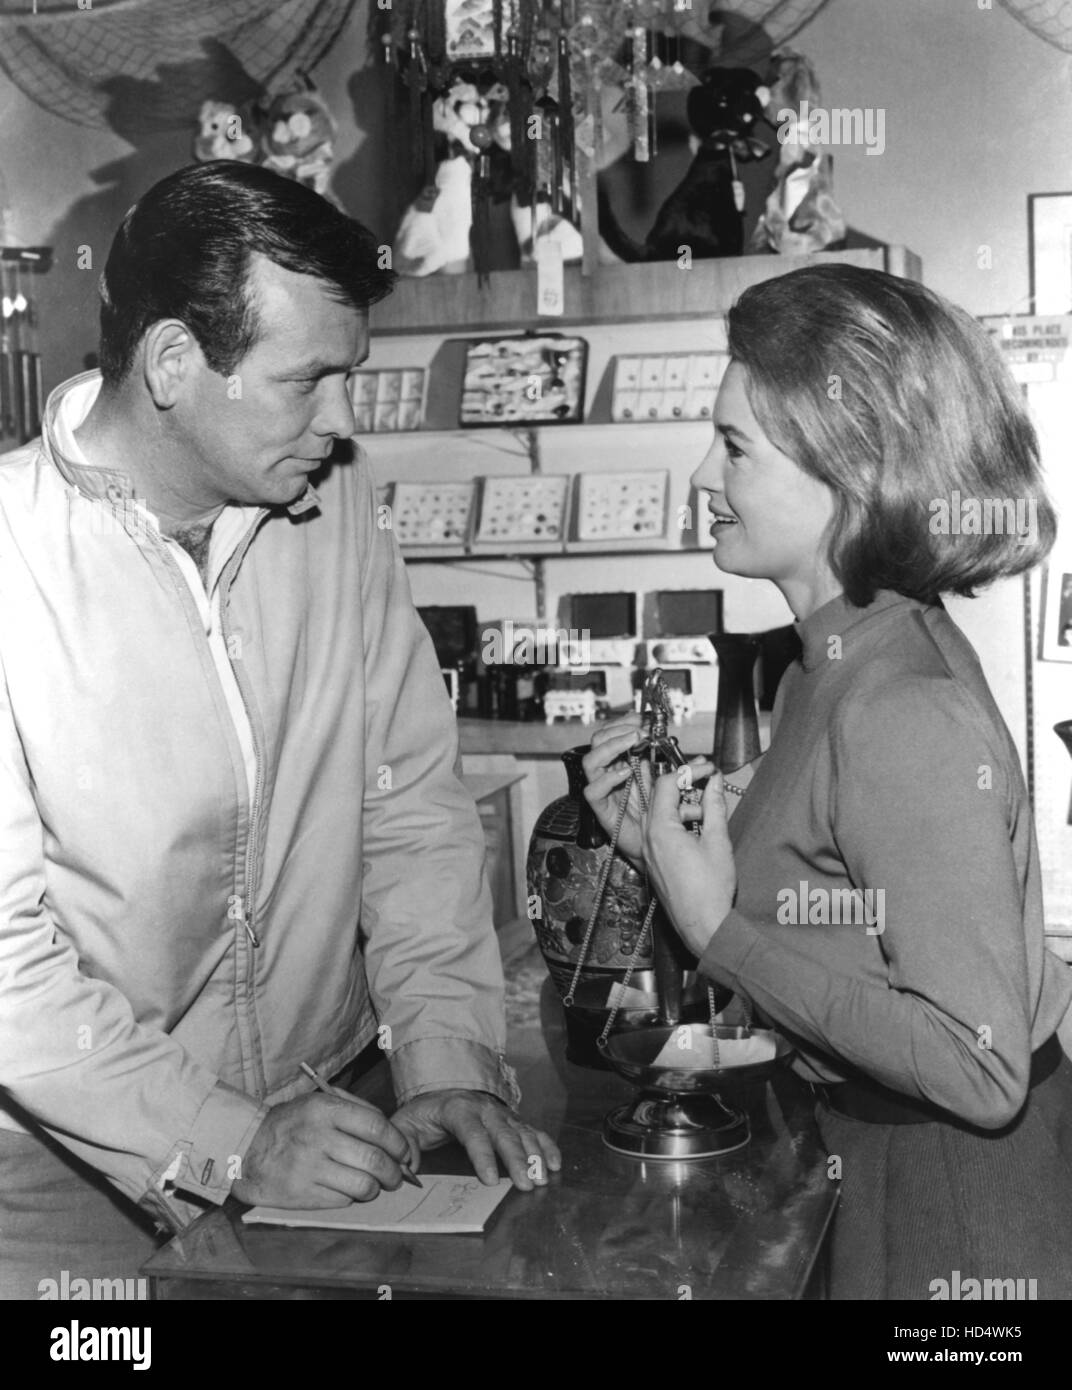 THE FUGITIVE, David Janssen, Angie Dickinson in episode 'Brass Ring' aired 1/5/65 Season 2, 1963-67 Stock Photo